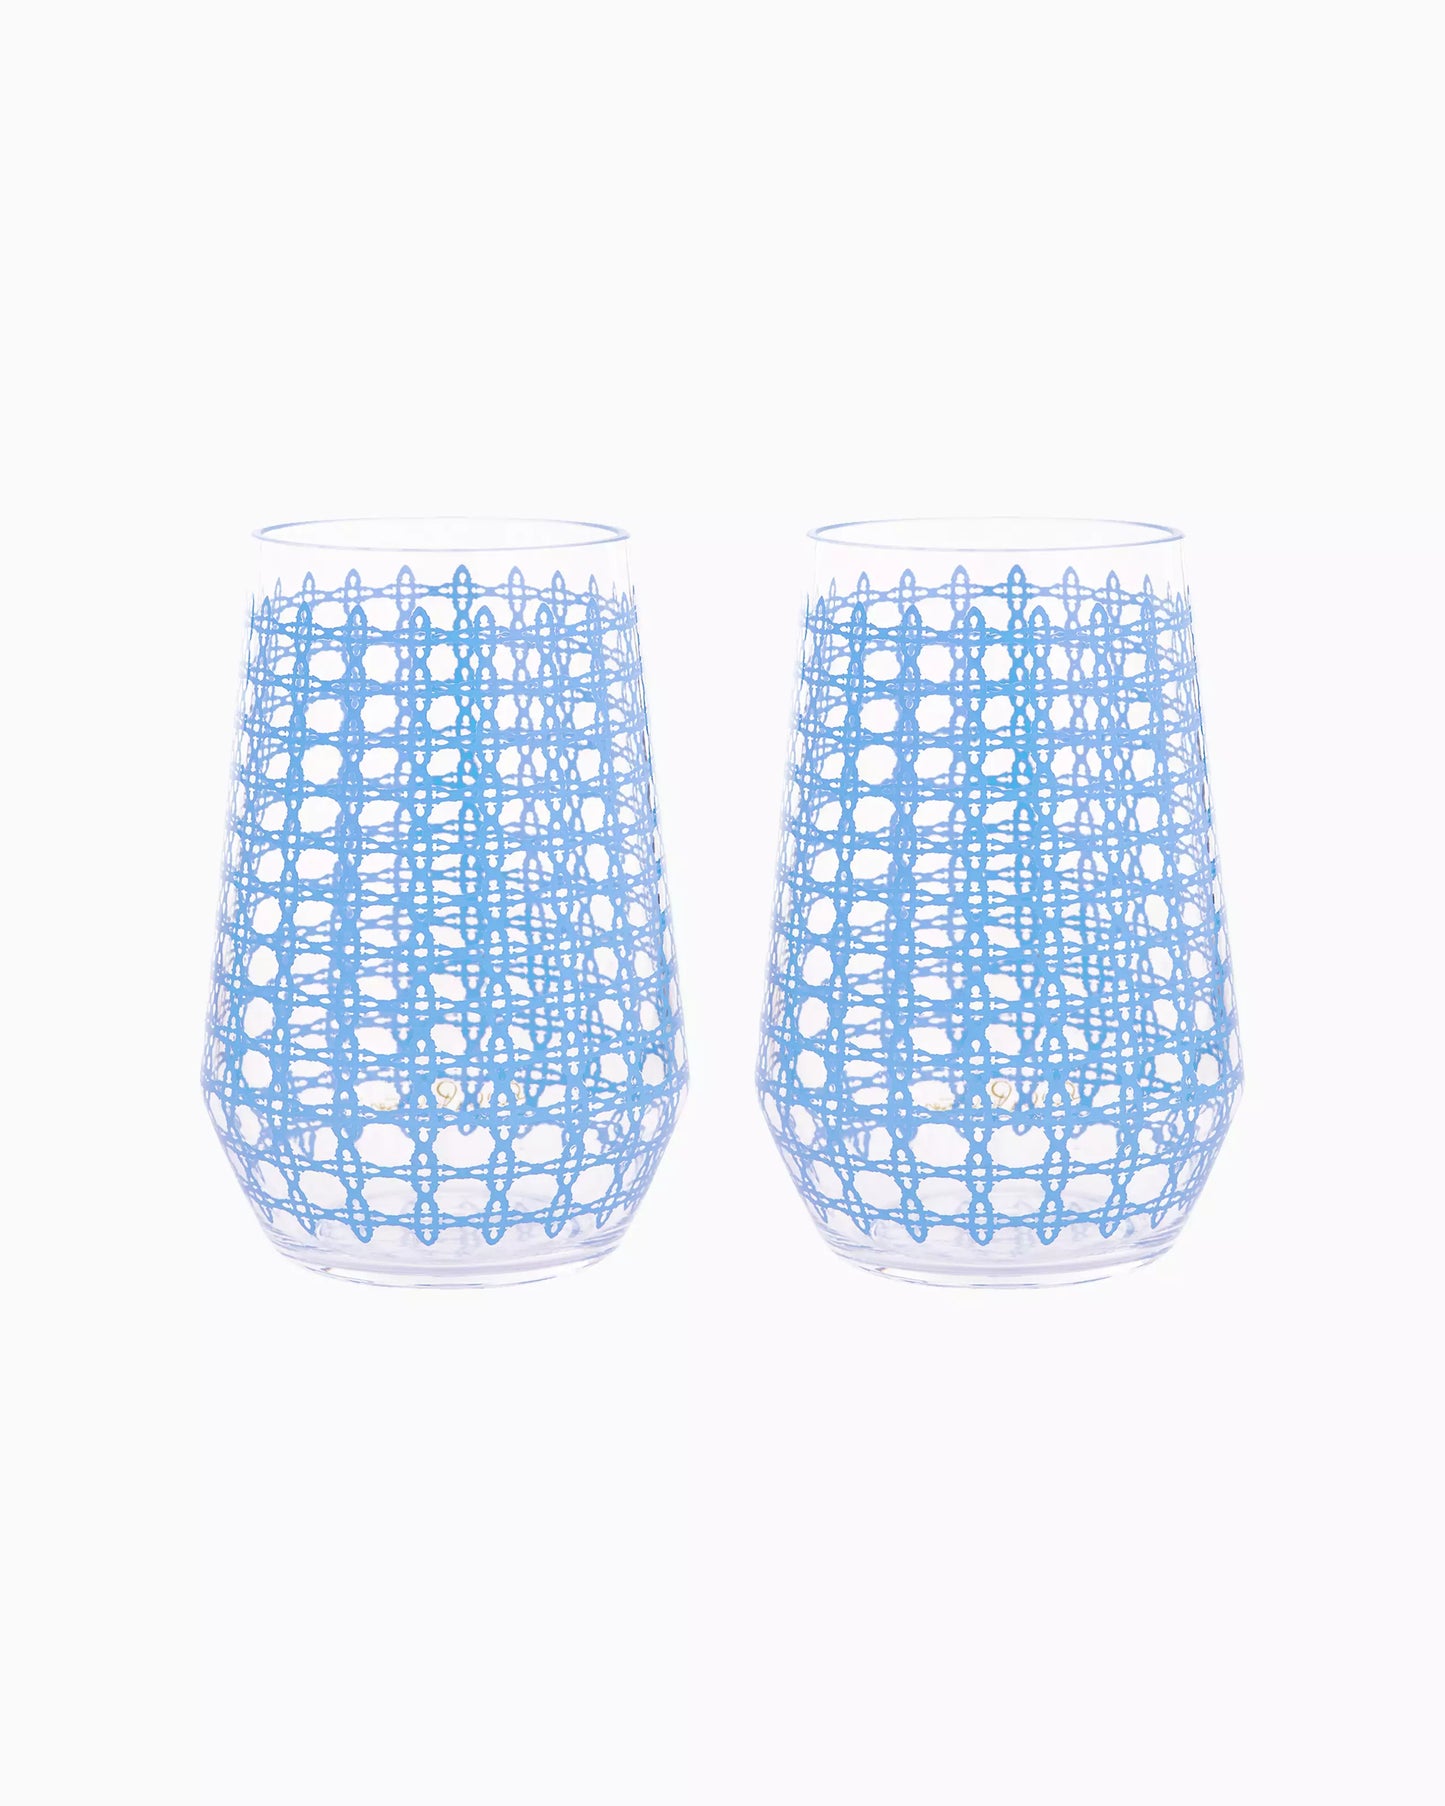 Lilly Pulitzer- FRENCHIE BLUE CANING ACRYLIC WINE GLASS SET